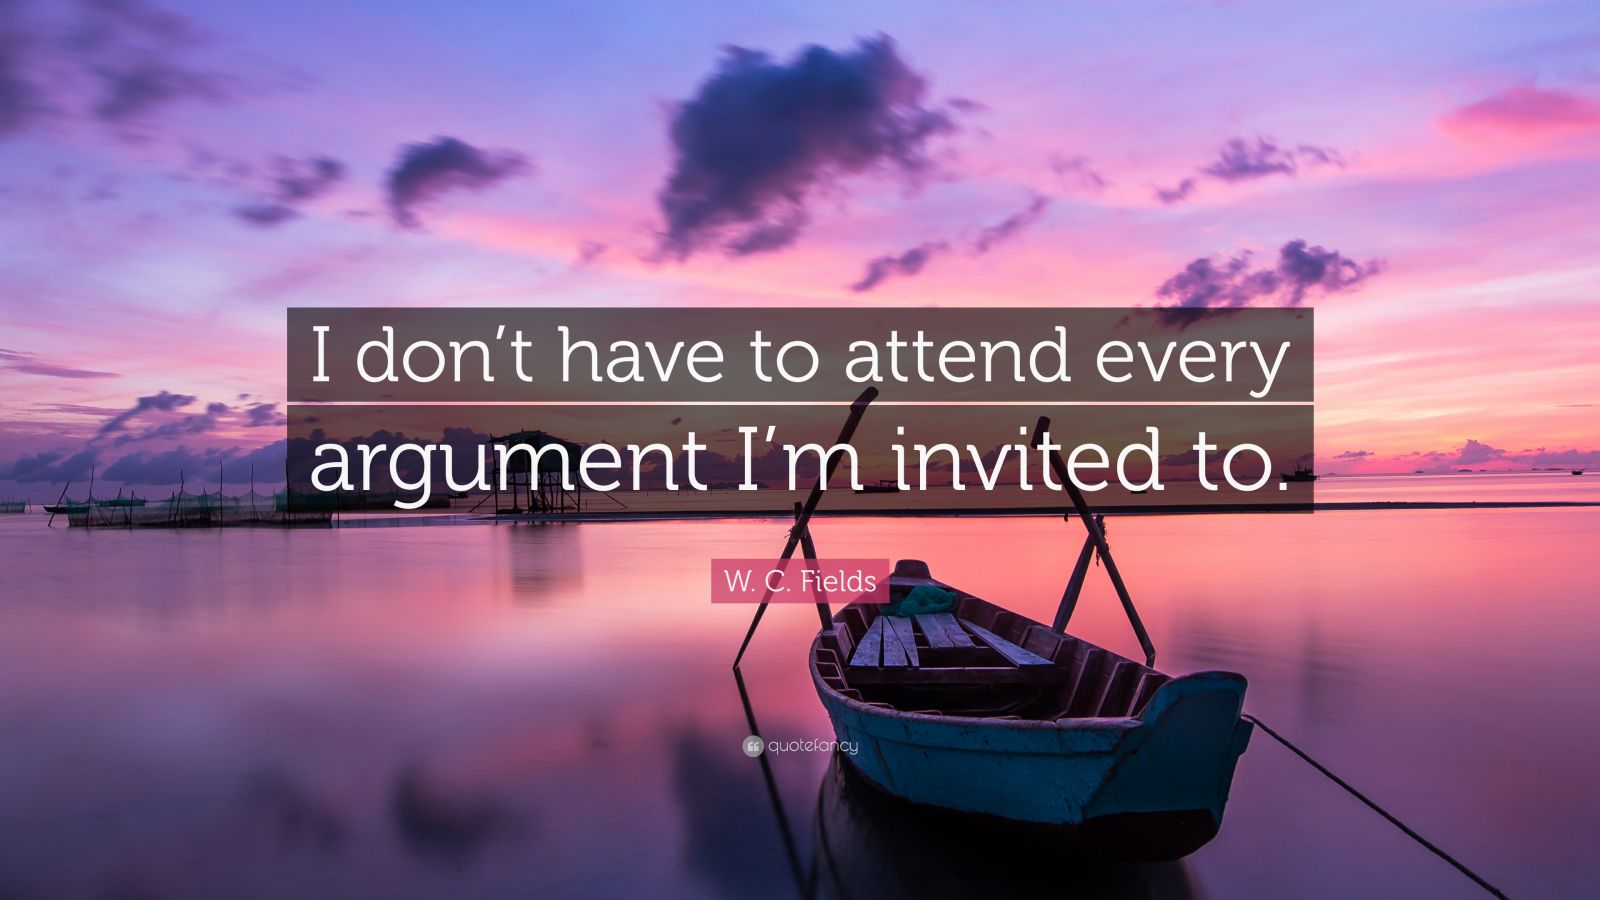 W C Fields Quote I Don T Have To Attend Every Argument I M Invited To